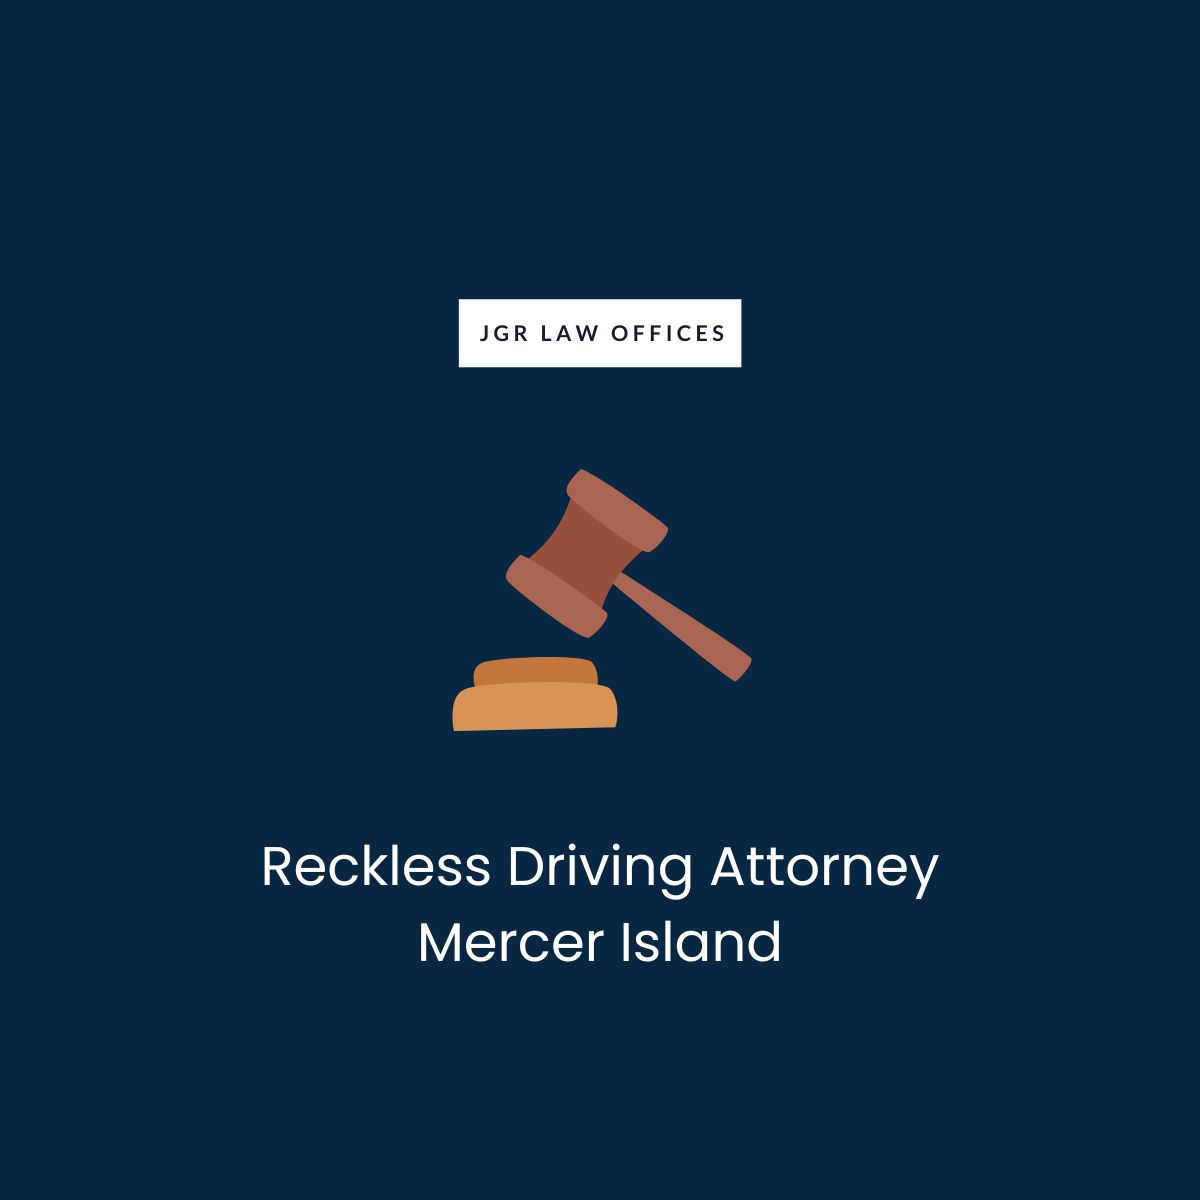 Reckless Driving Lawyer Mercer Island Reckless Driving